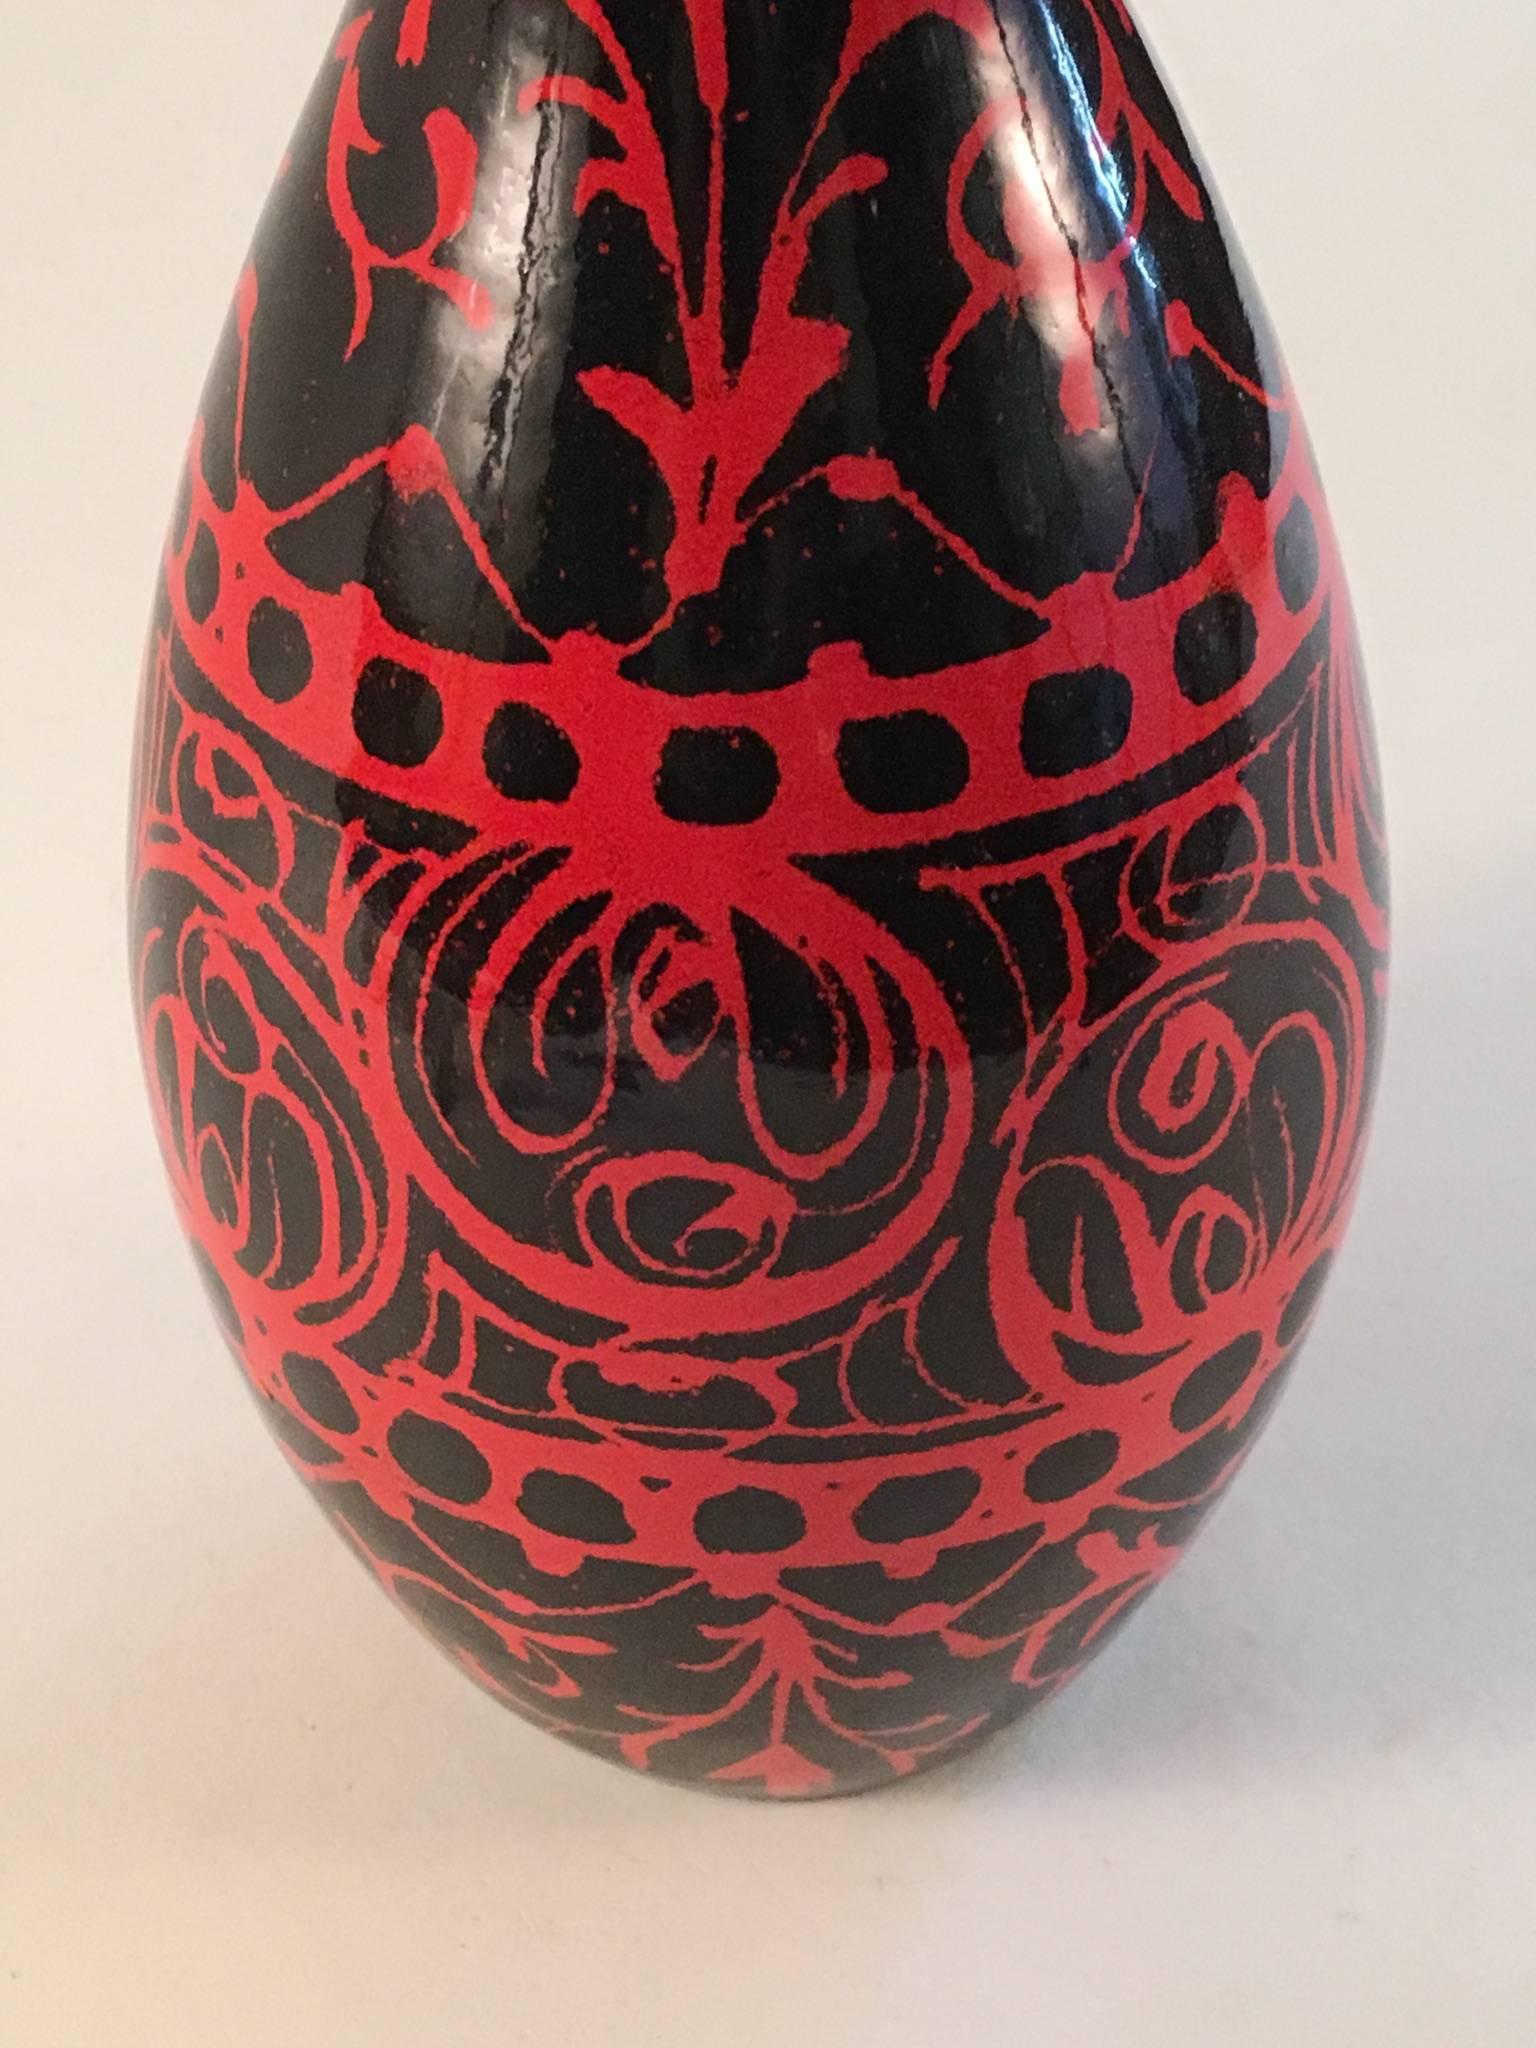 A bottle shaped vase with a ring neck, reminiscent of an 18th century glass decanter, in black with a red swirl pattern glaze. With its original Raymor label.